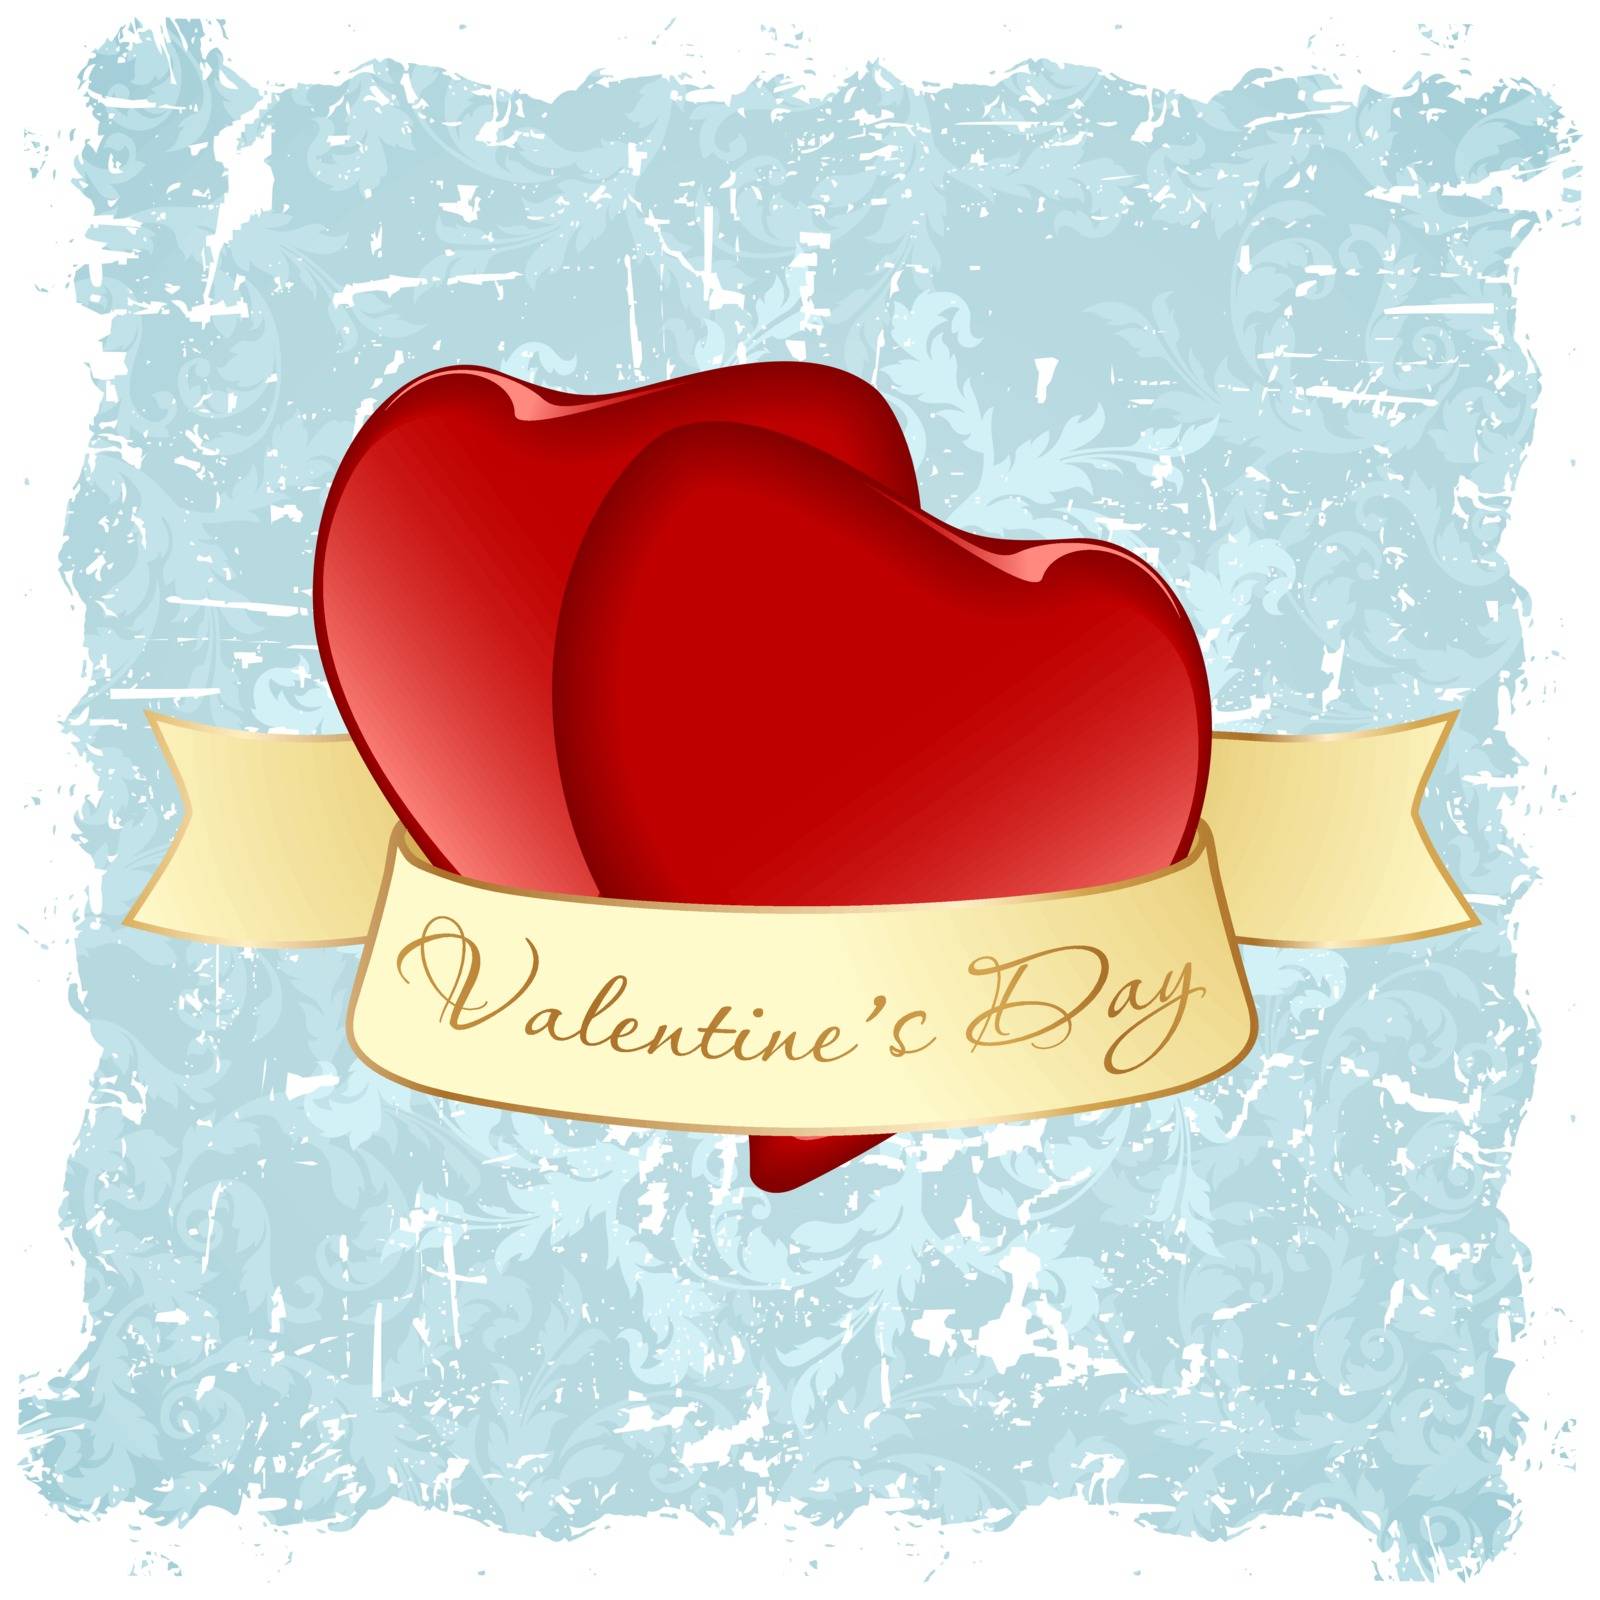 Grungy Valentine's Day Background by WaD